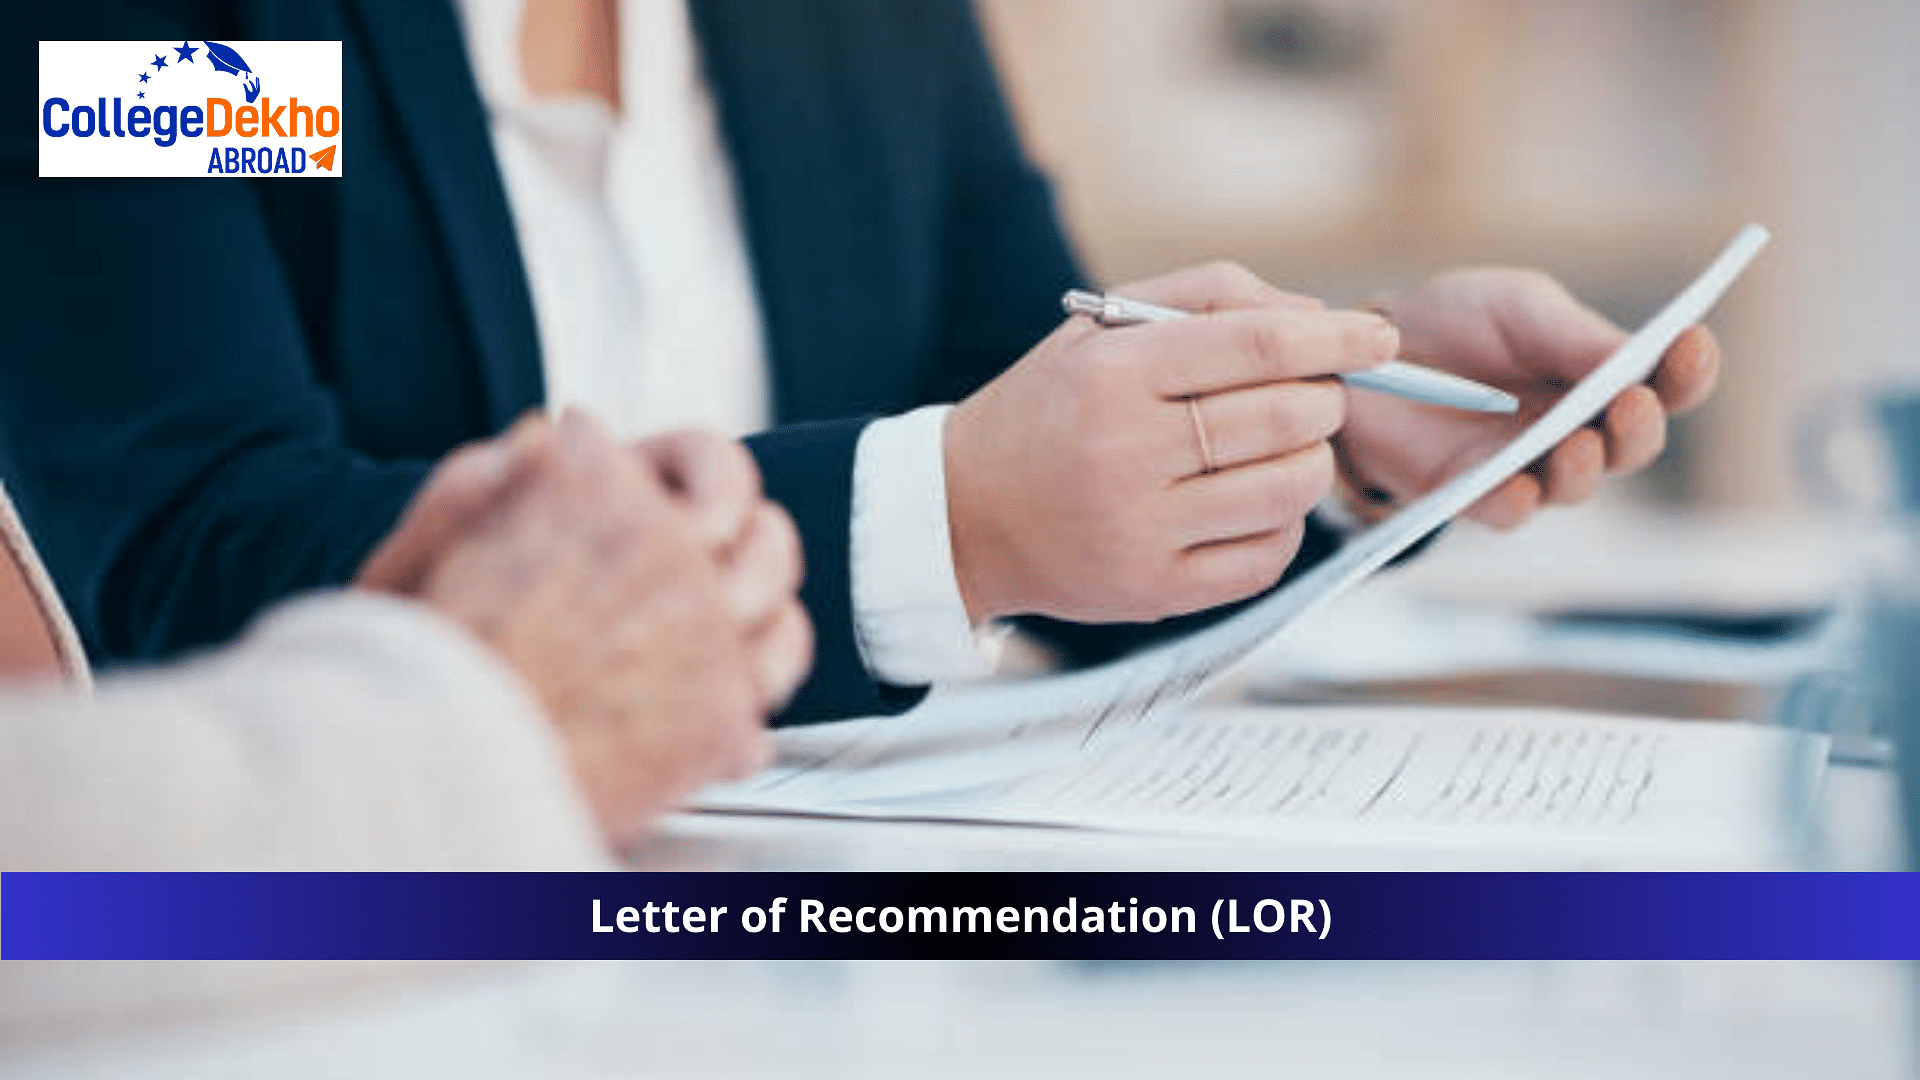 Letter of Recommendation (LOR)